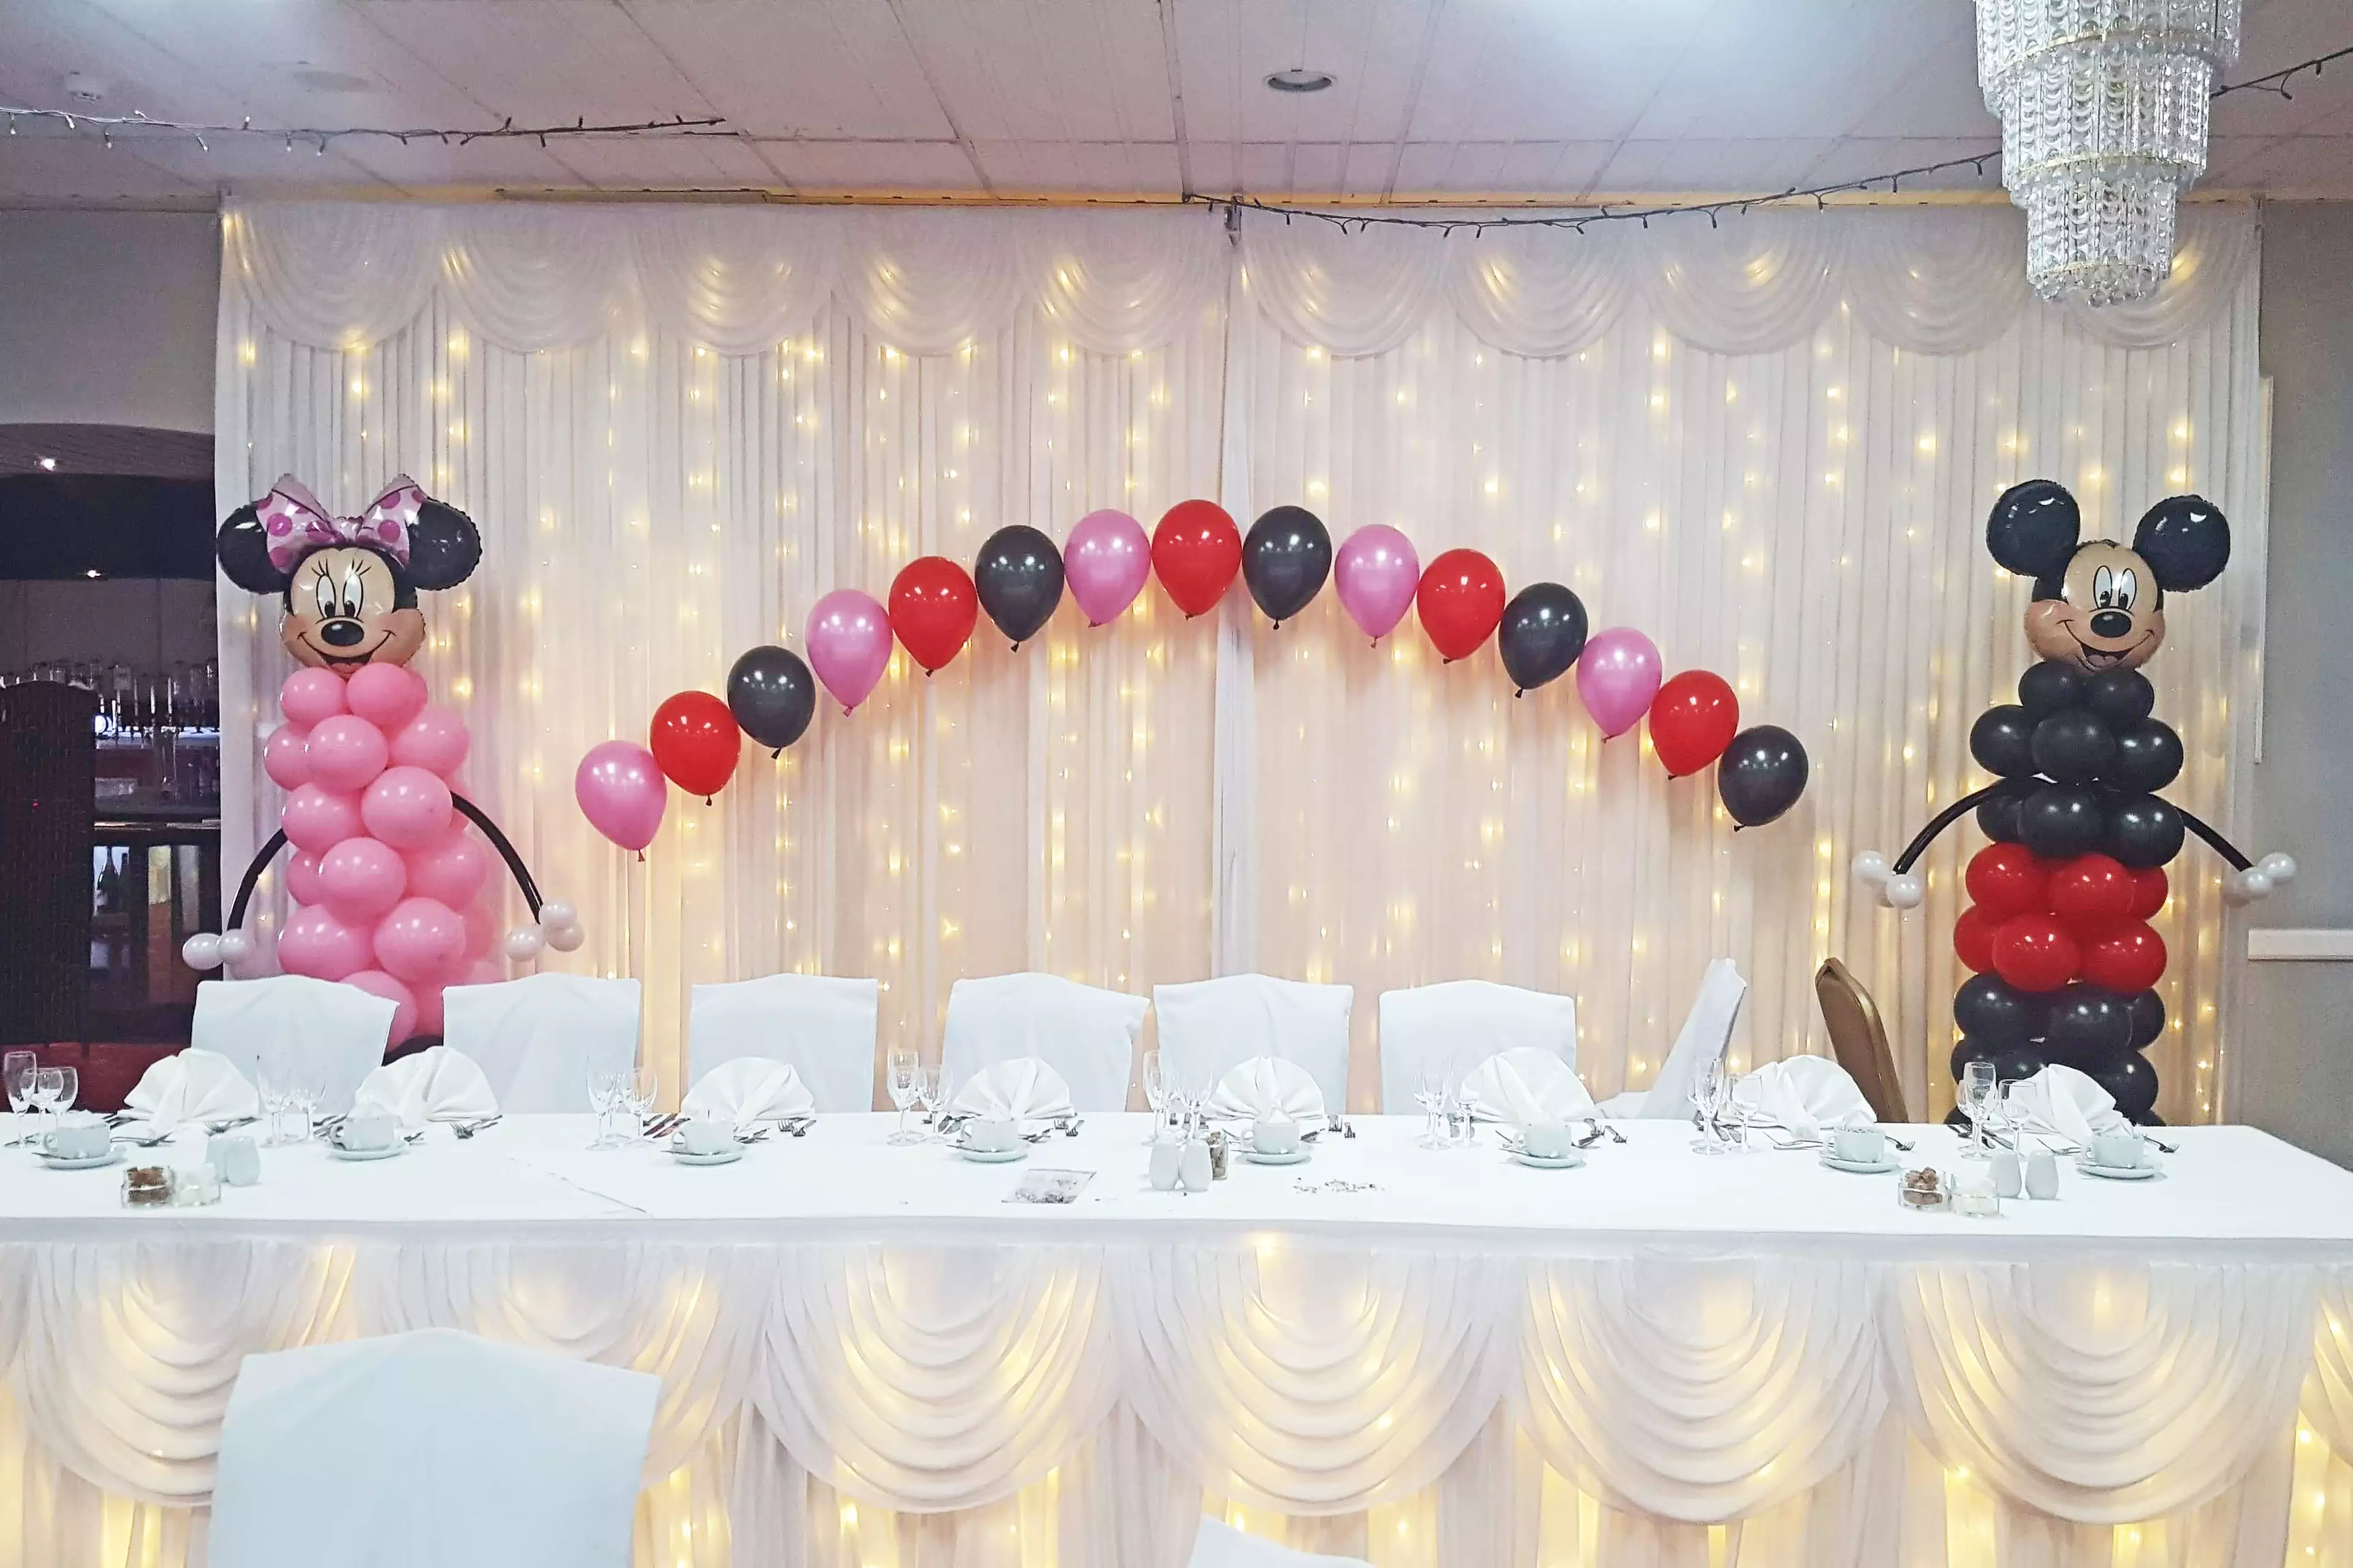 The wedding breakfast in The Best Western was decorated with Minnie and Mickey balloons. (